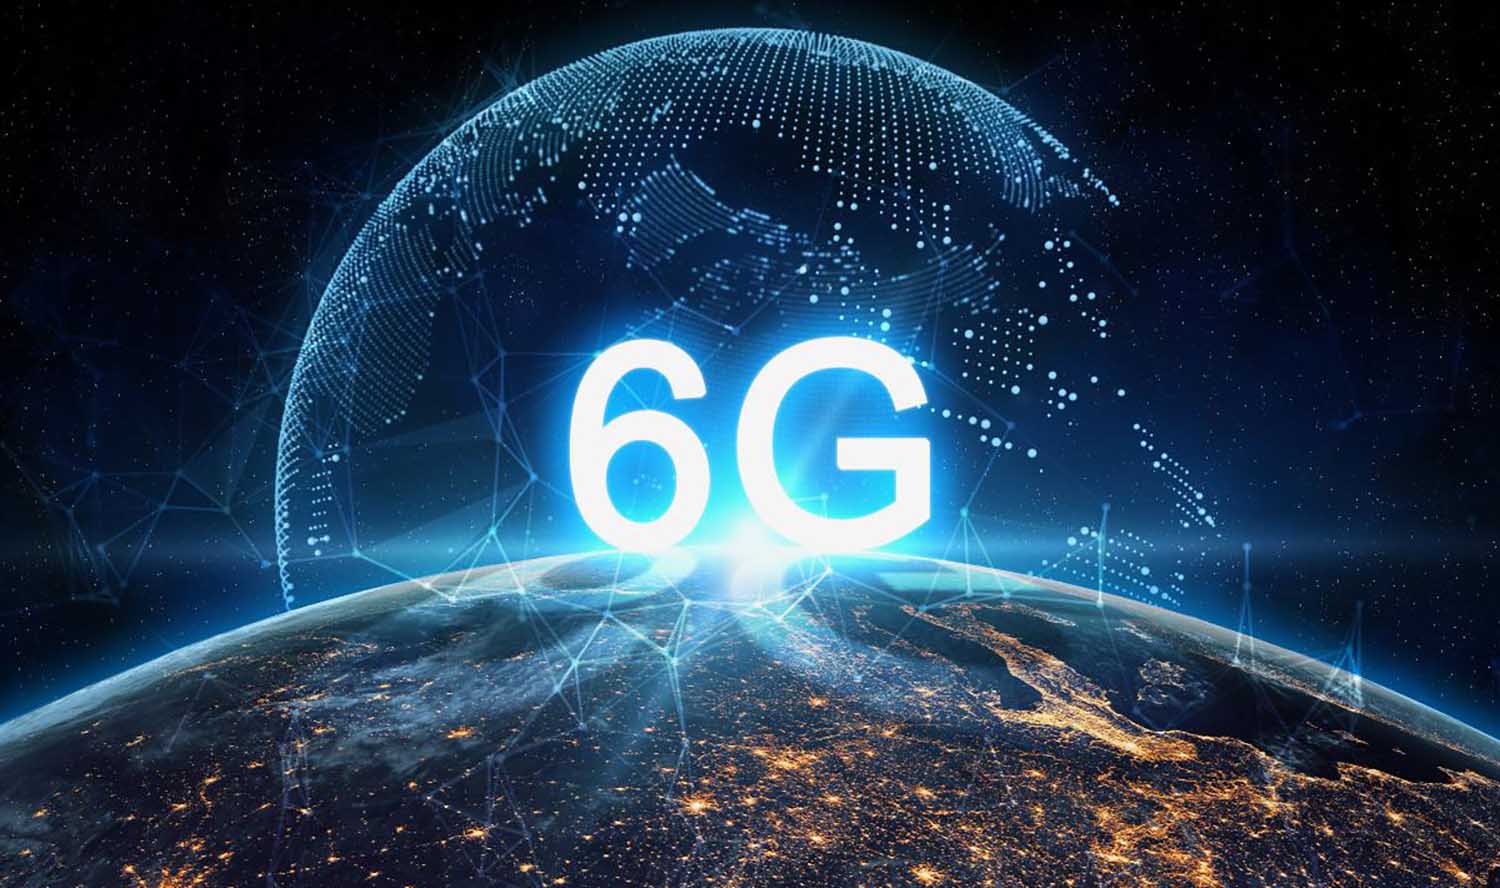 samsung 6g rollout